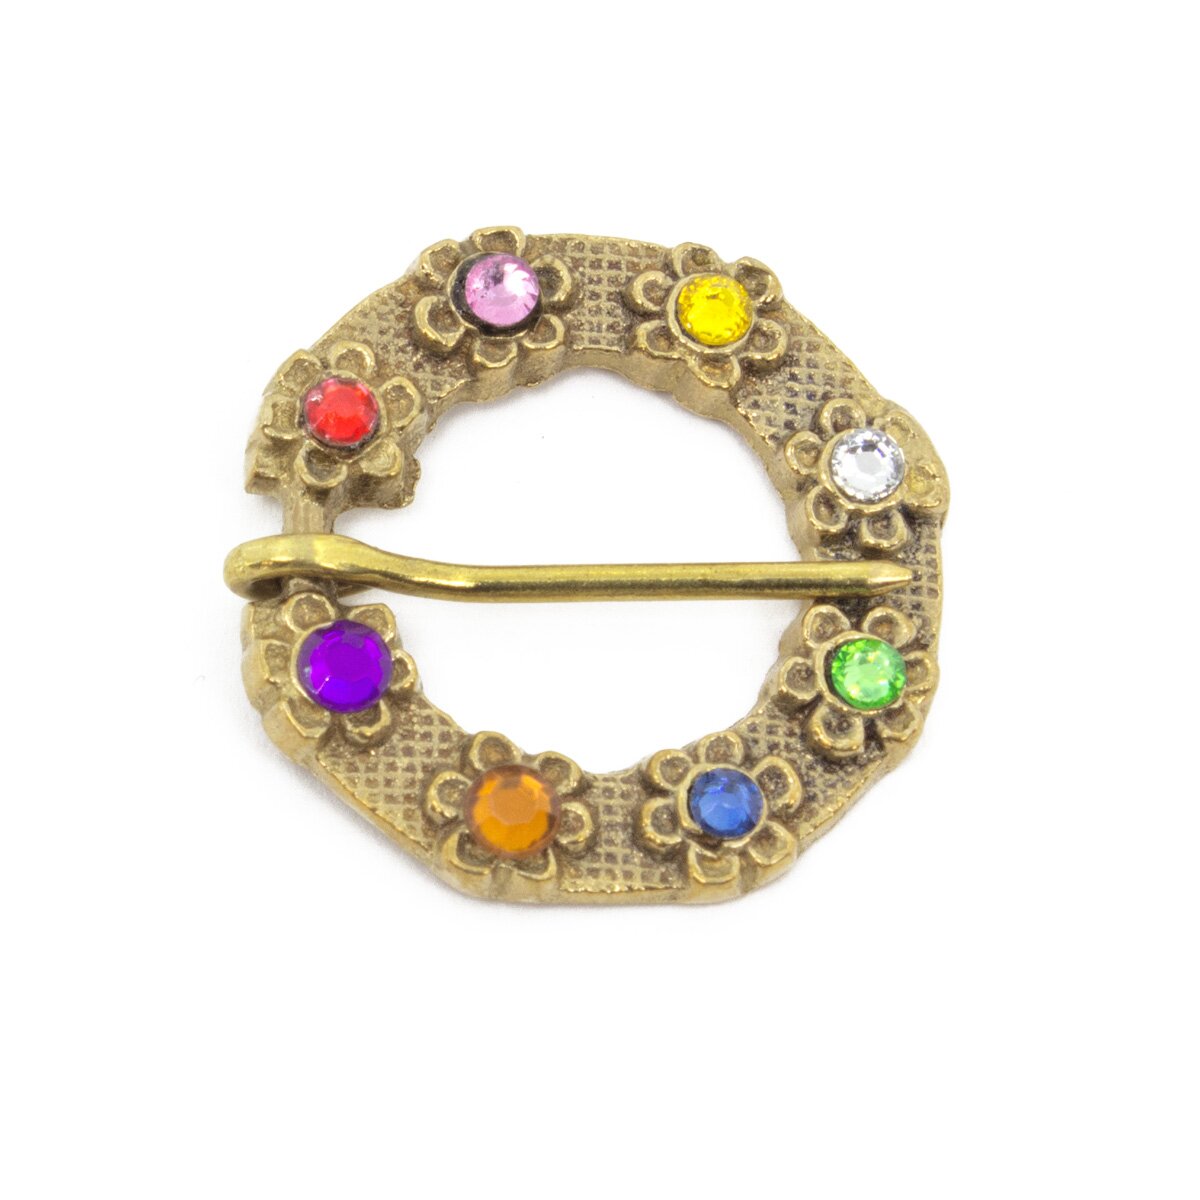 Late medieval brooch with colored glass stones